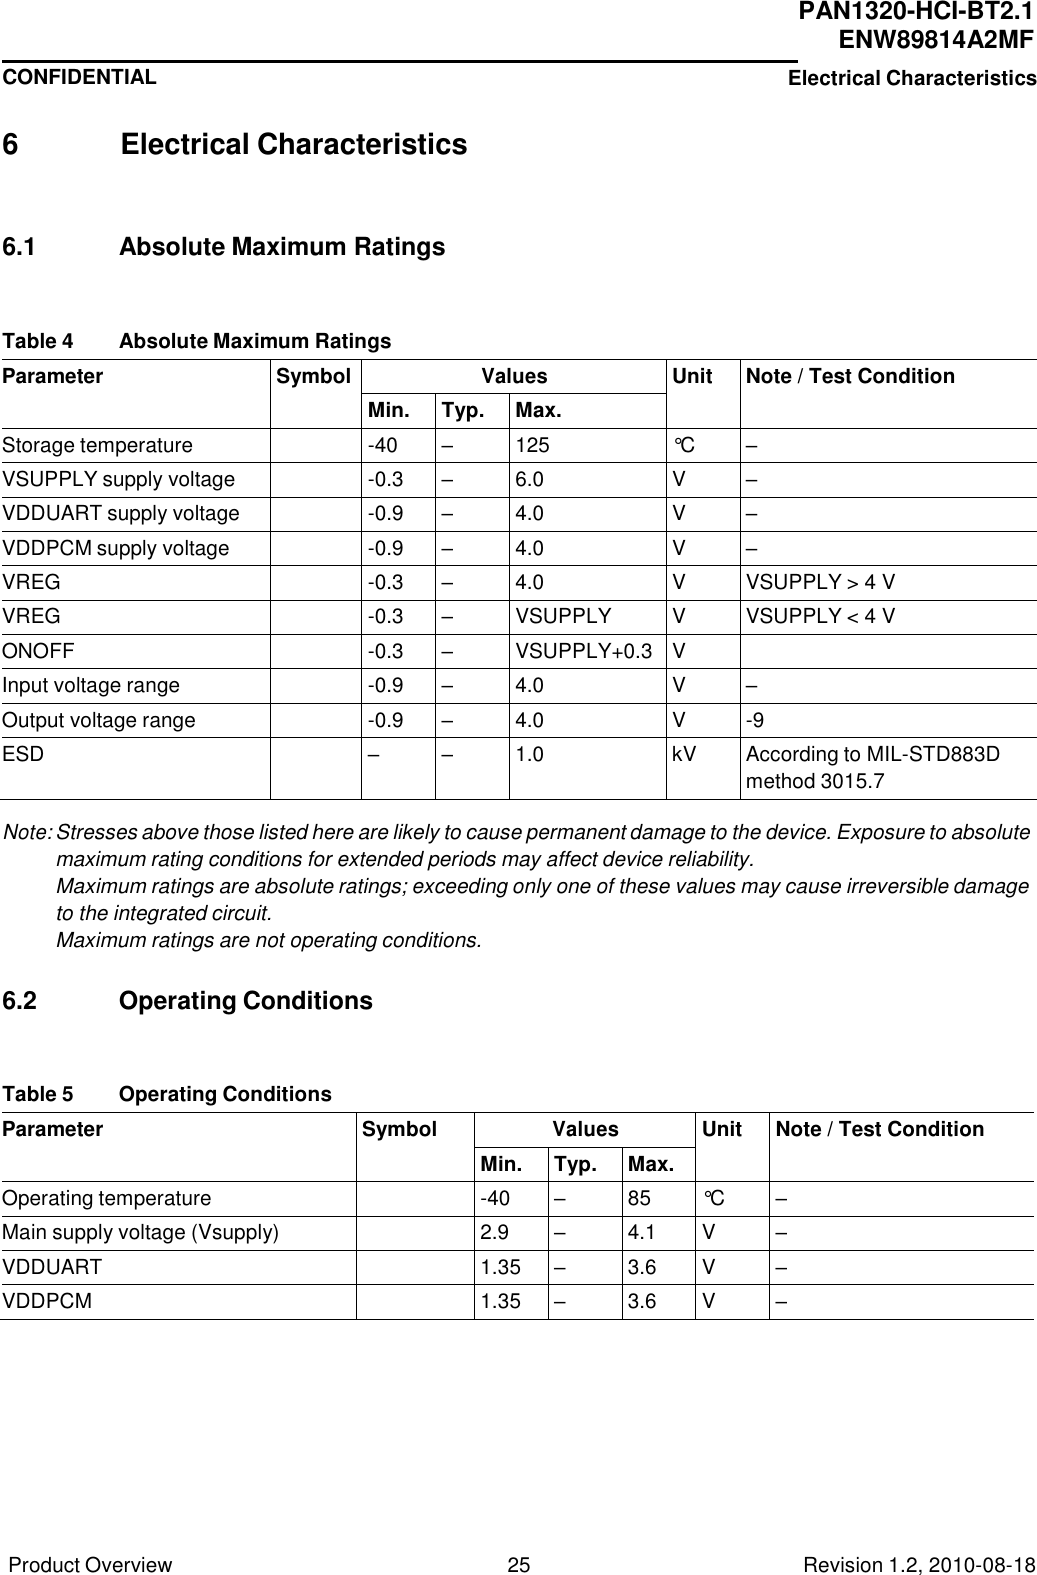 Product Overview 25 Revision 1.2, 2010-08-18   PAN1320-HCI-BT2.1 ENW89814A2MF CONFIDENTIAL Electrical Characteristics 6 Electrical Characteristics      6.1  Absolute Maximum Ratings    Table 4  Absolute Maximum Ratings  Parameter Symbol Values Unit Note / Test Condition Min. Typ. Max. Storage temperature  -40 – 125 °C – VSUPPLY supply voltage  -0.3 – 6.0 V – VDDUART supply voltage  -0.9 – 4.0 V – VDDPCM supply voltage  -0.9 – 4.0 V – VREG  -0.3 – 4.0 V VSUPPLY &gt; 4 V VREG  -0.3 – VSUPPLY V VSUPPLY &lt; 4 V ONOFF  -0.3 – VSUPPLY+0.3 V  Input voltage range  -0.9 – 4.0 V – Output voltage range  -0.9 – 4.0 V -9 ESD  – – 1.0 kV According to MIL-STD883D method 3015.7  Note: Stresses above those listed here are likely to cause permanent damage to the device. Exposure to absolute maximum rating conditions for extended periods may affect device reliability. Maximum ratings are absolute ratings; exceeding only one of these values may cause irreversible damage to the integrated circuit. Maximum ratings are not operating conditions.   6.2  Operating Conditions    Table 5  Operating Conditions  Parameter Symbol Values Unit Note / Test Condition Min. Typ. Max. Operating temperature  -40 – 85 °C – Main supply voltage (Vsupply)  2.9 – 4.1 V – VDDUART  1.35 – 3.6 V – VDDPCM  1.35 – 3.6 V – 